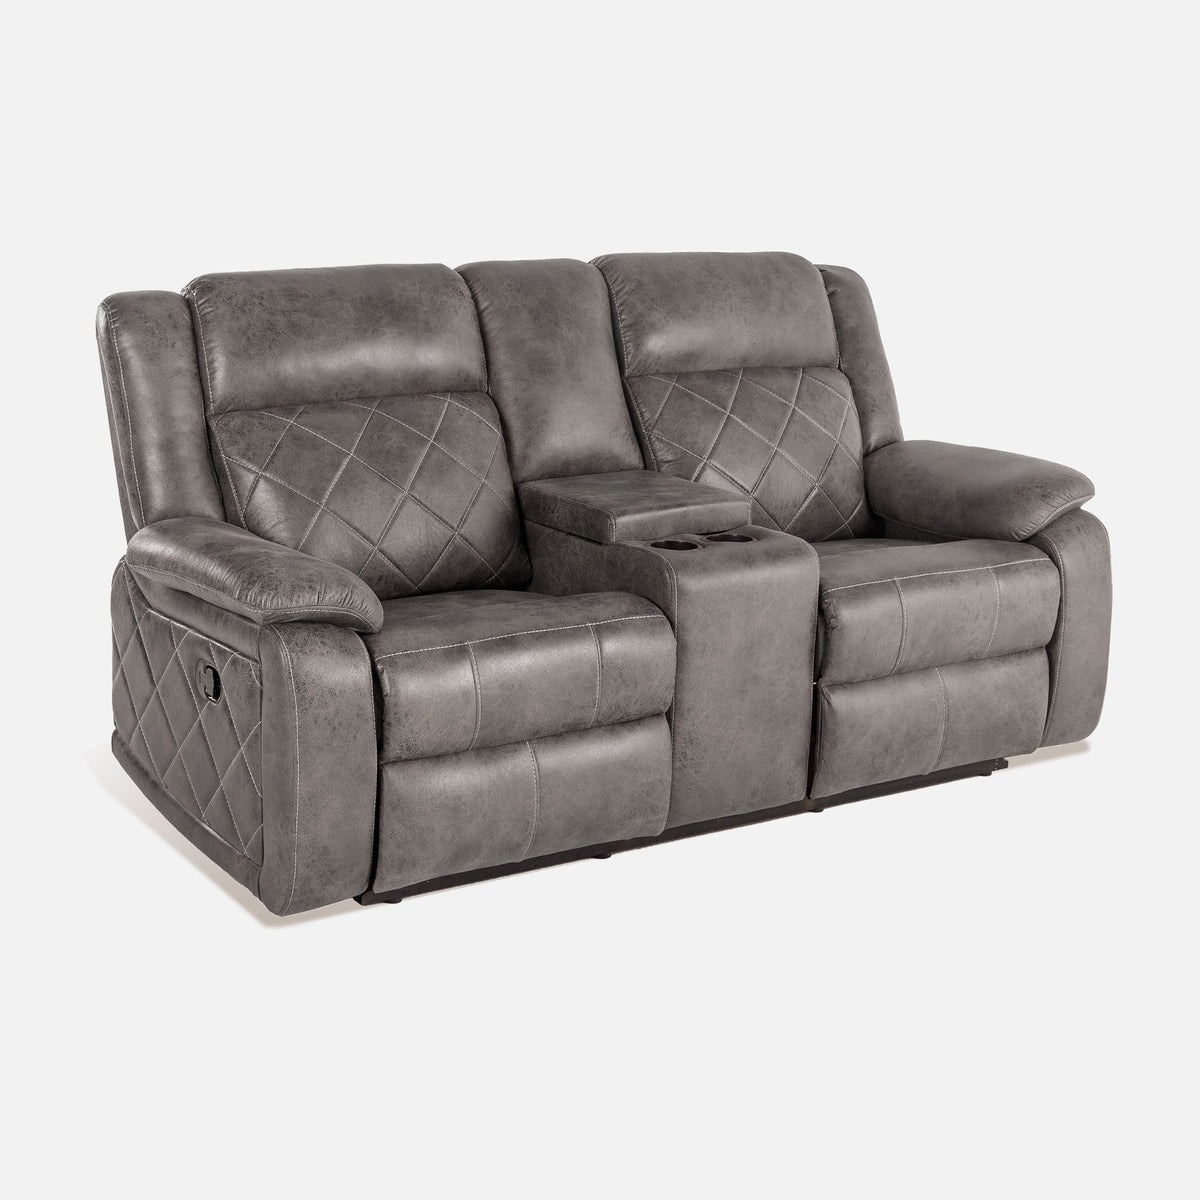 Werfo Marvel 2 Seater Recliner With Console (grey) - 186.69 cm x 96.52 cm